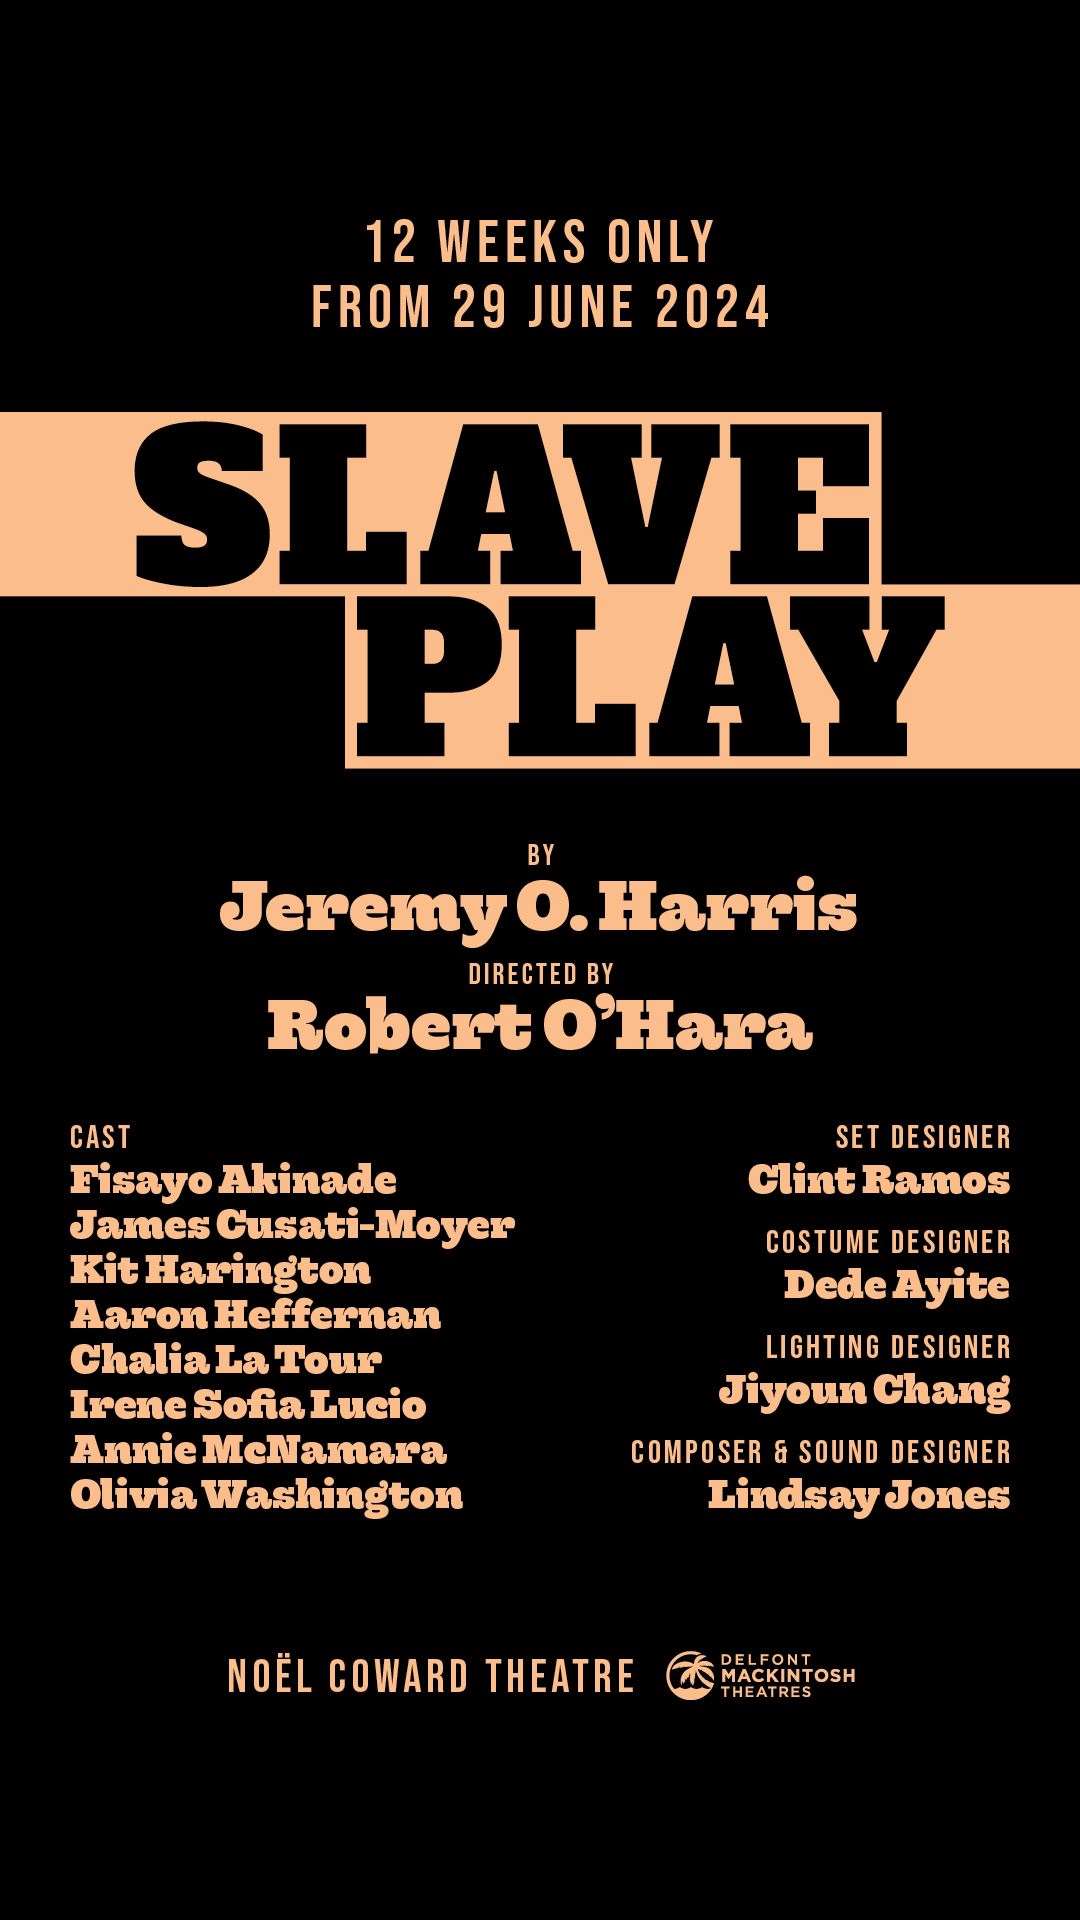 Slave Play will open on June 29 21 (PA)